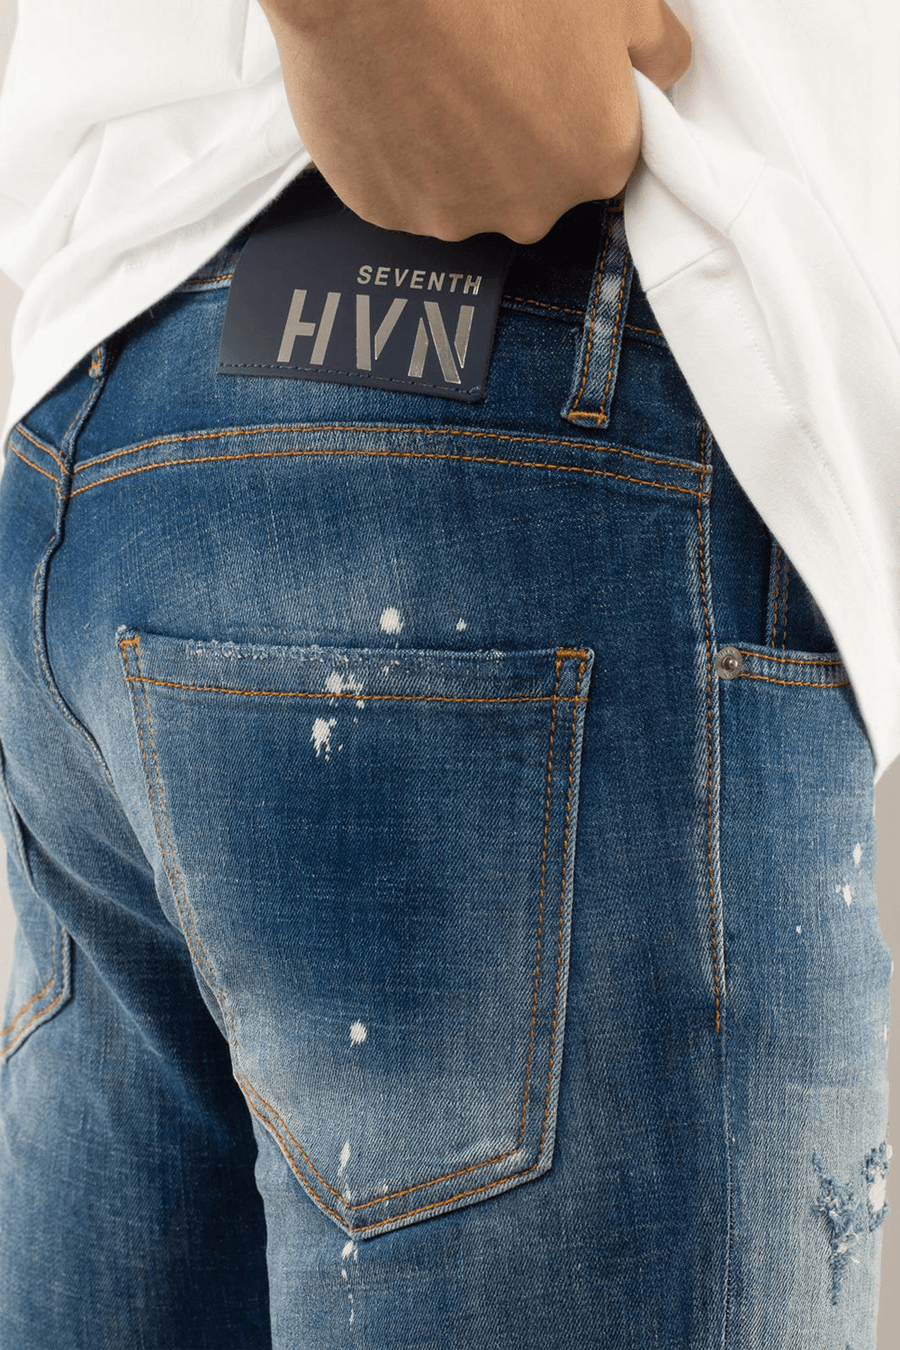 Buy the 7TH HVN Fly Rider S2487 Jean in Blue at Intro. Spend £50 for free UK delivery. Official stockists. We ship worldwide.